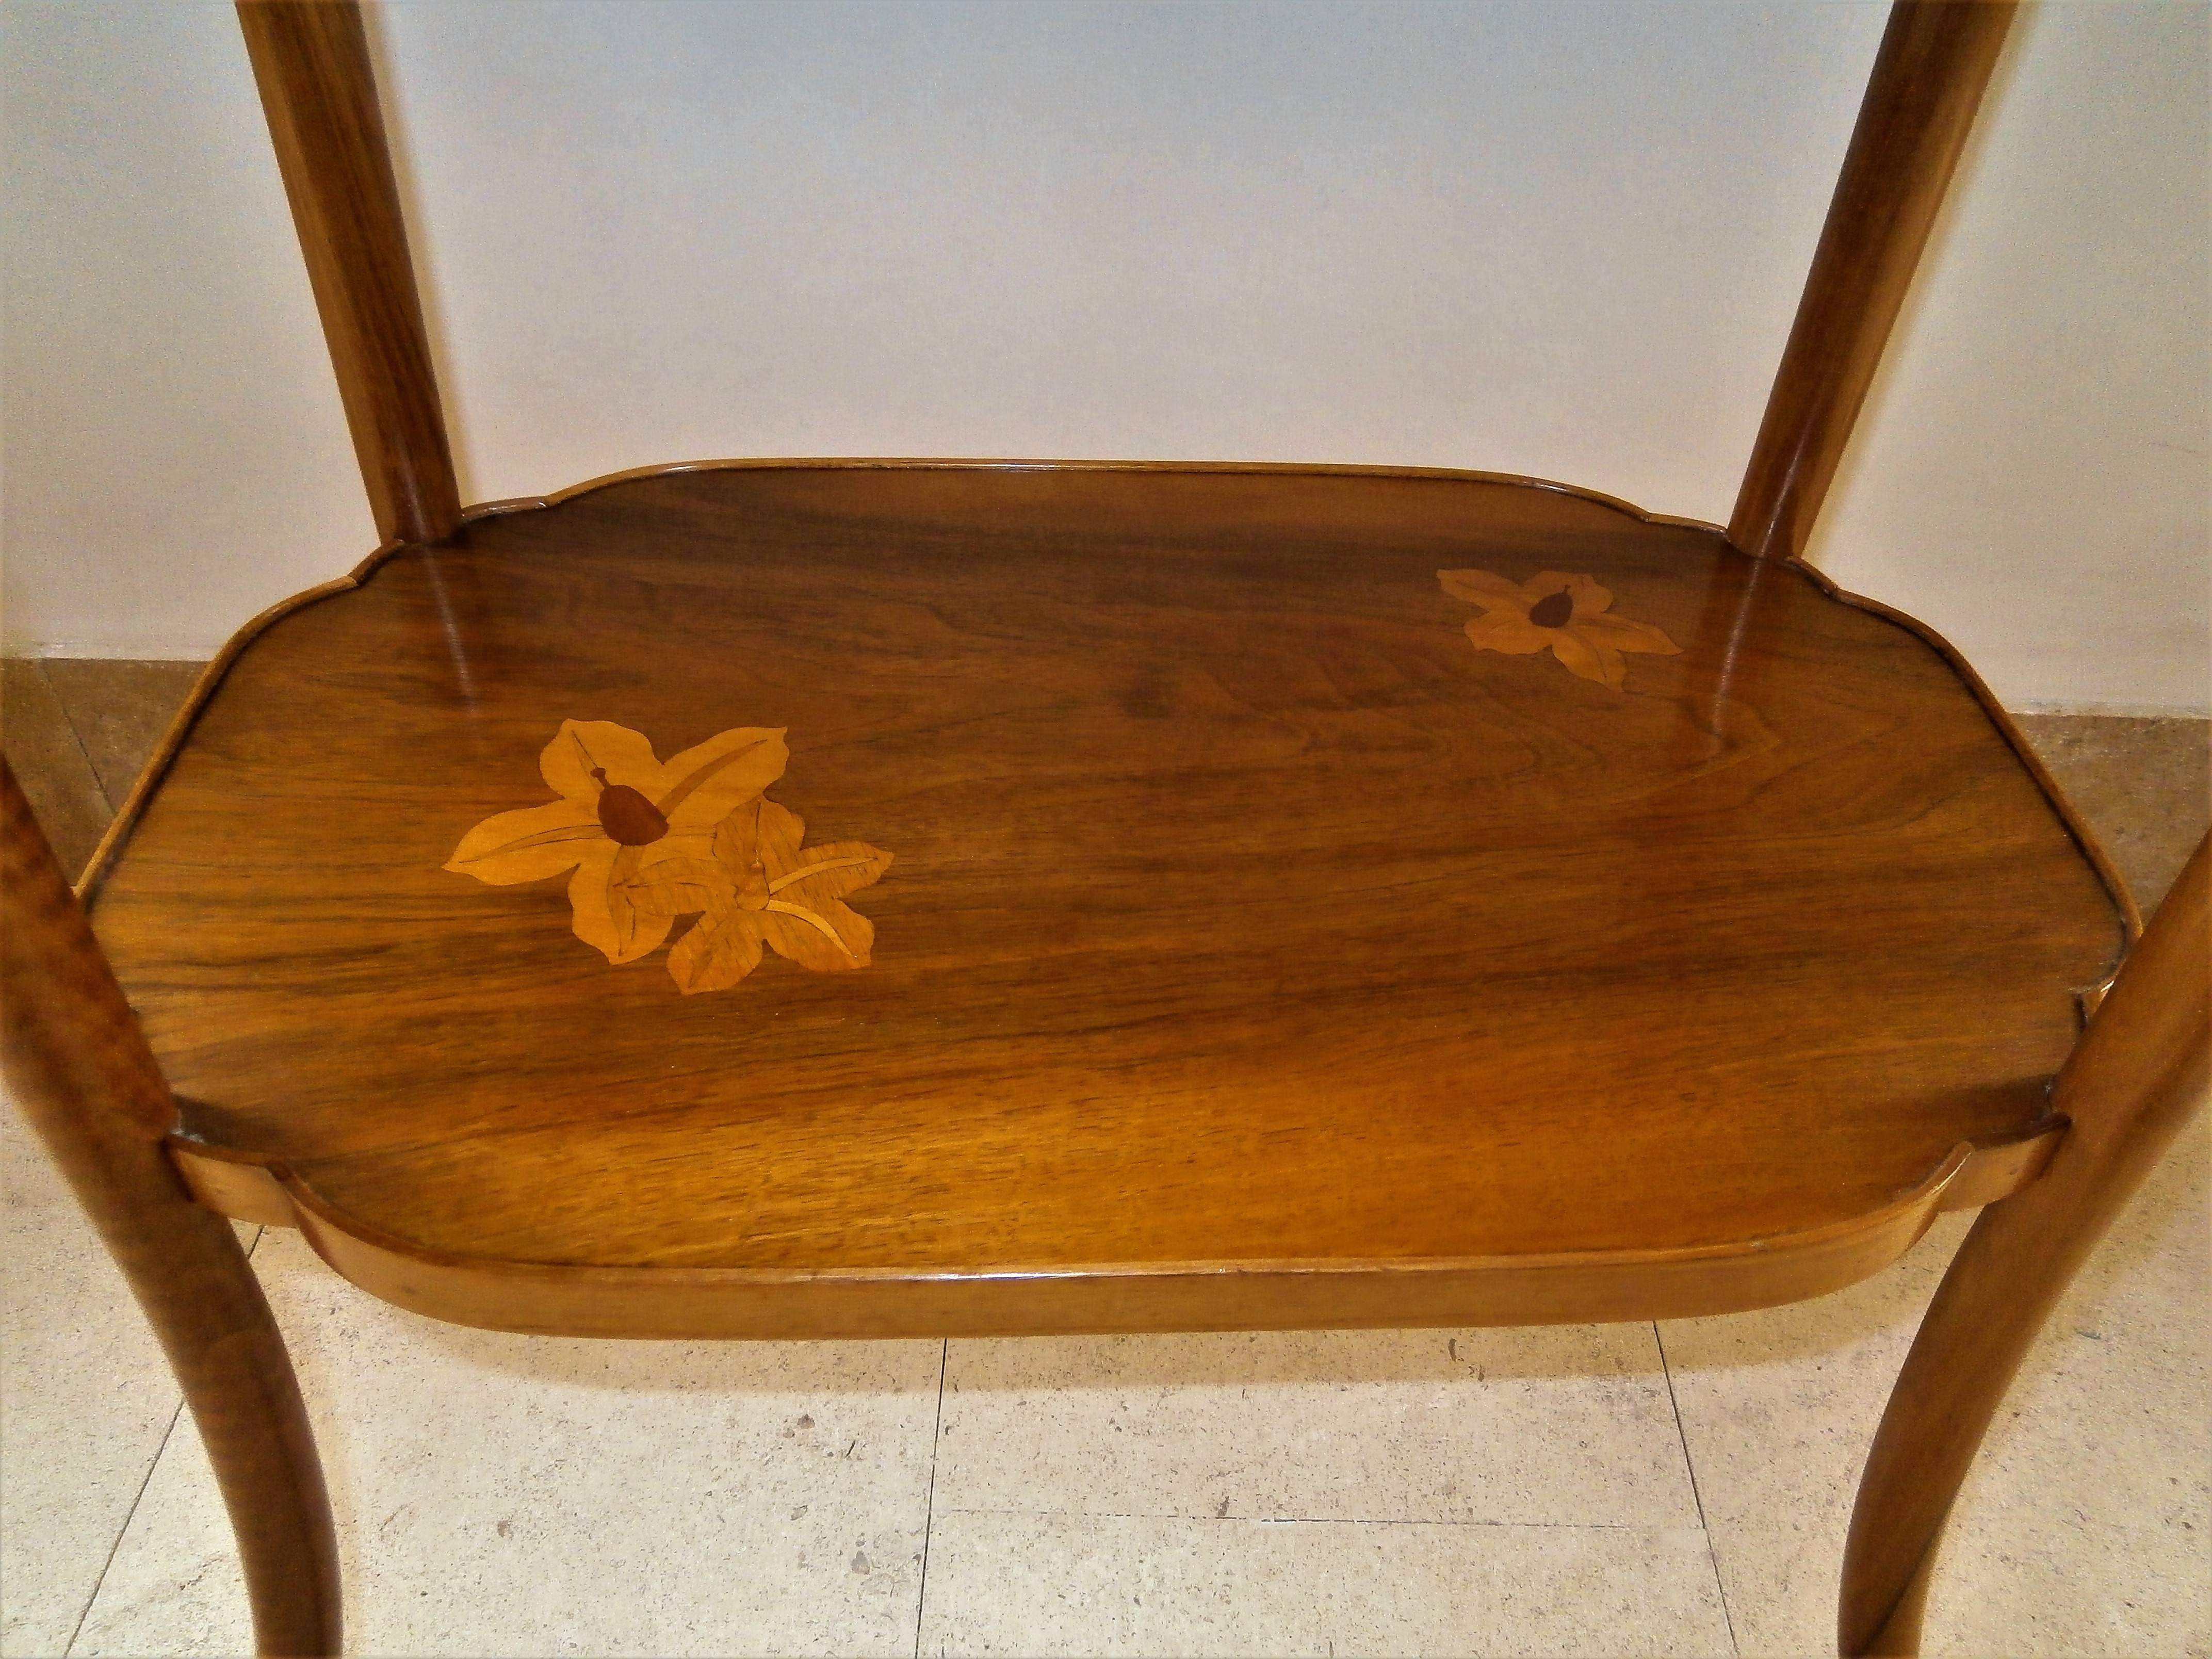 French Art Nouveau marquetry gueridon table, inlaid signed in a Japanese way by Gallé,

France, circa 1900.
  